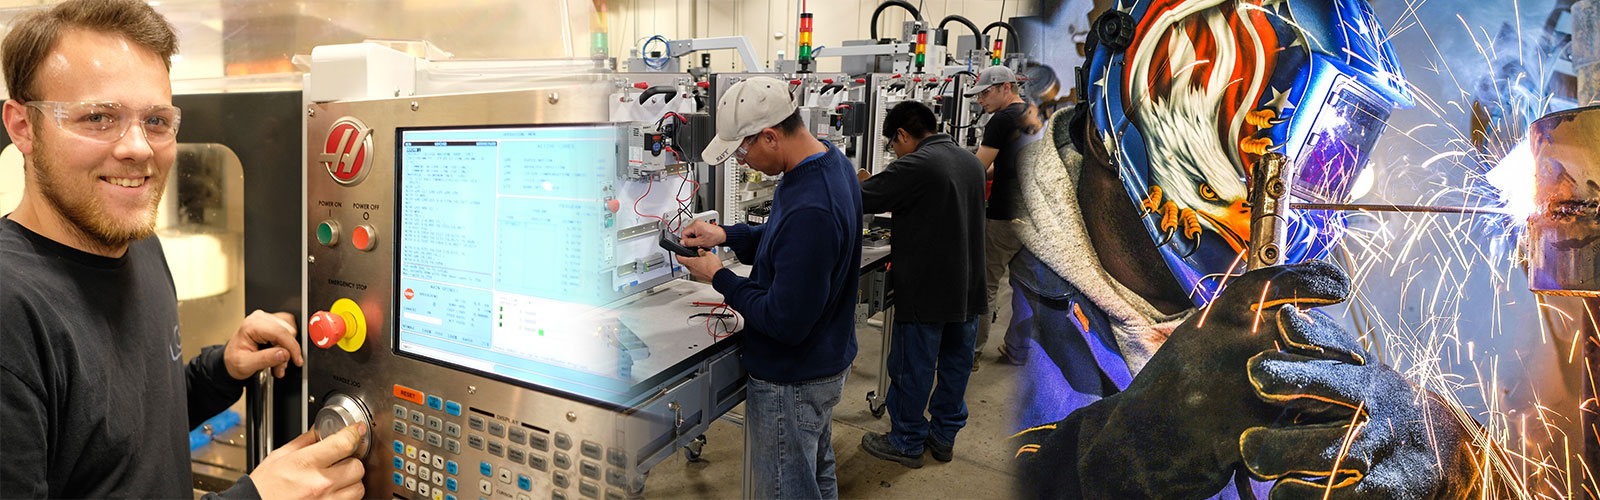 welding and manufacturing students